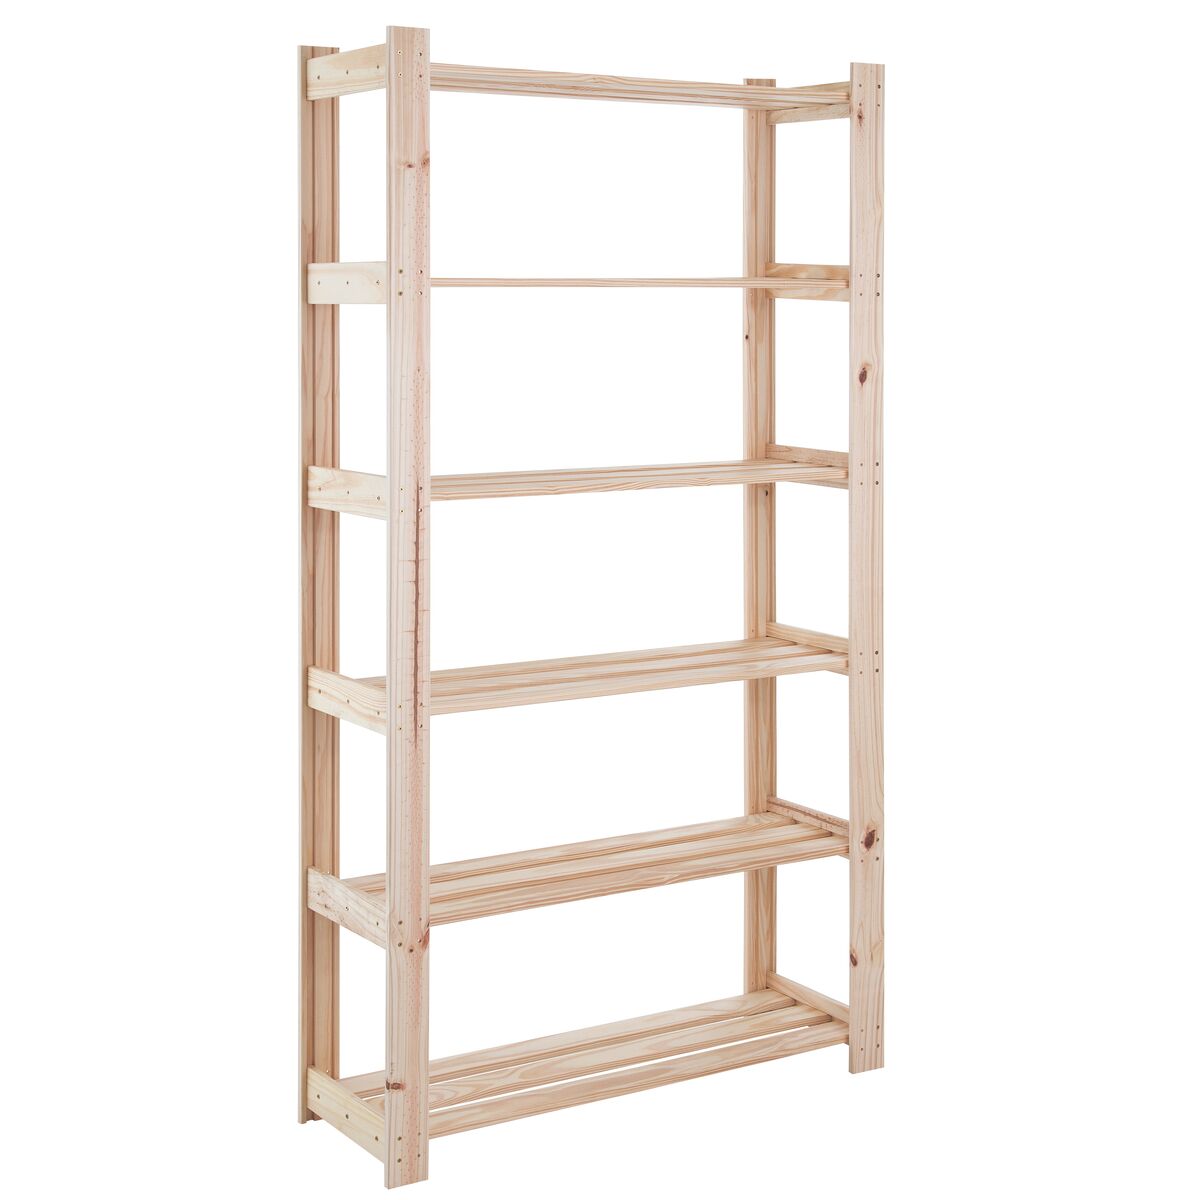 Tramontina Modulare Pine Wood Bookcase with Natural Finish and 6 Shelves, 90x30.2 cm
